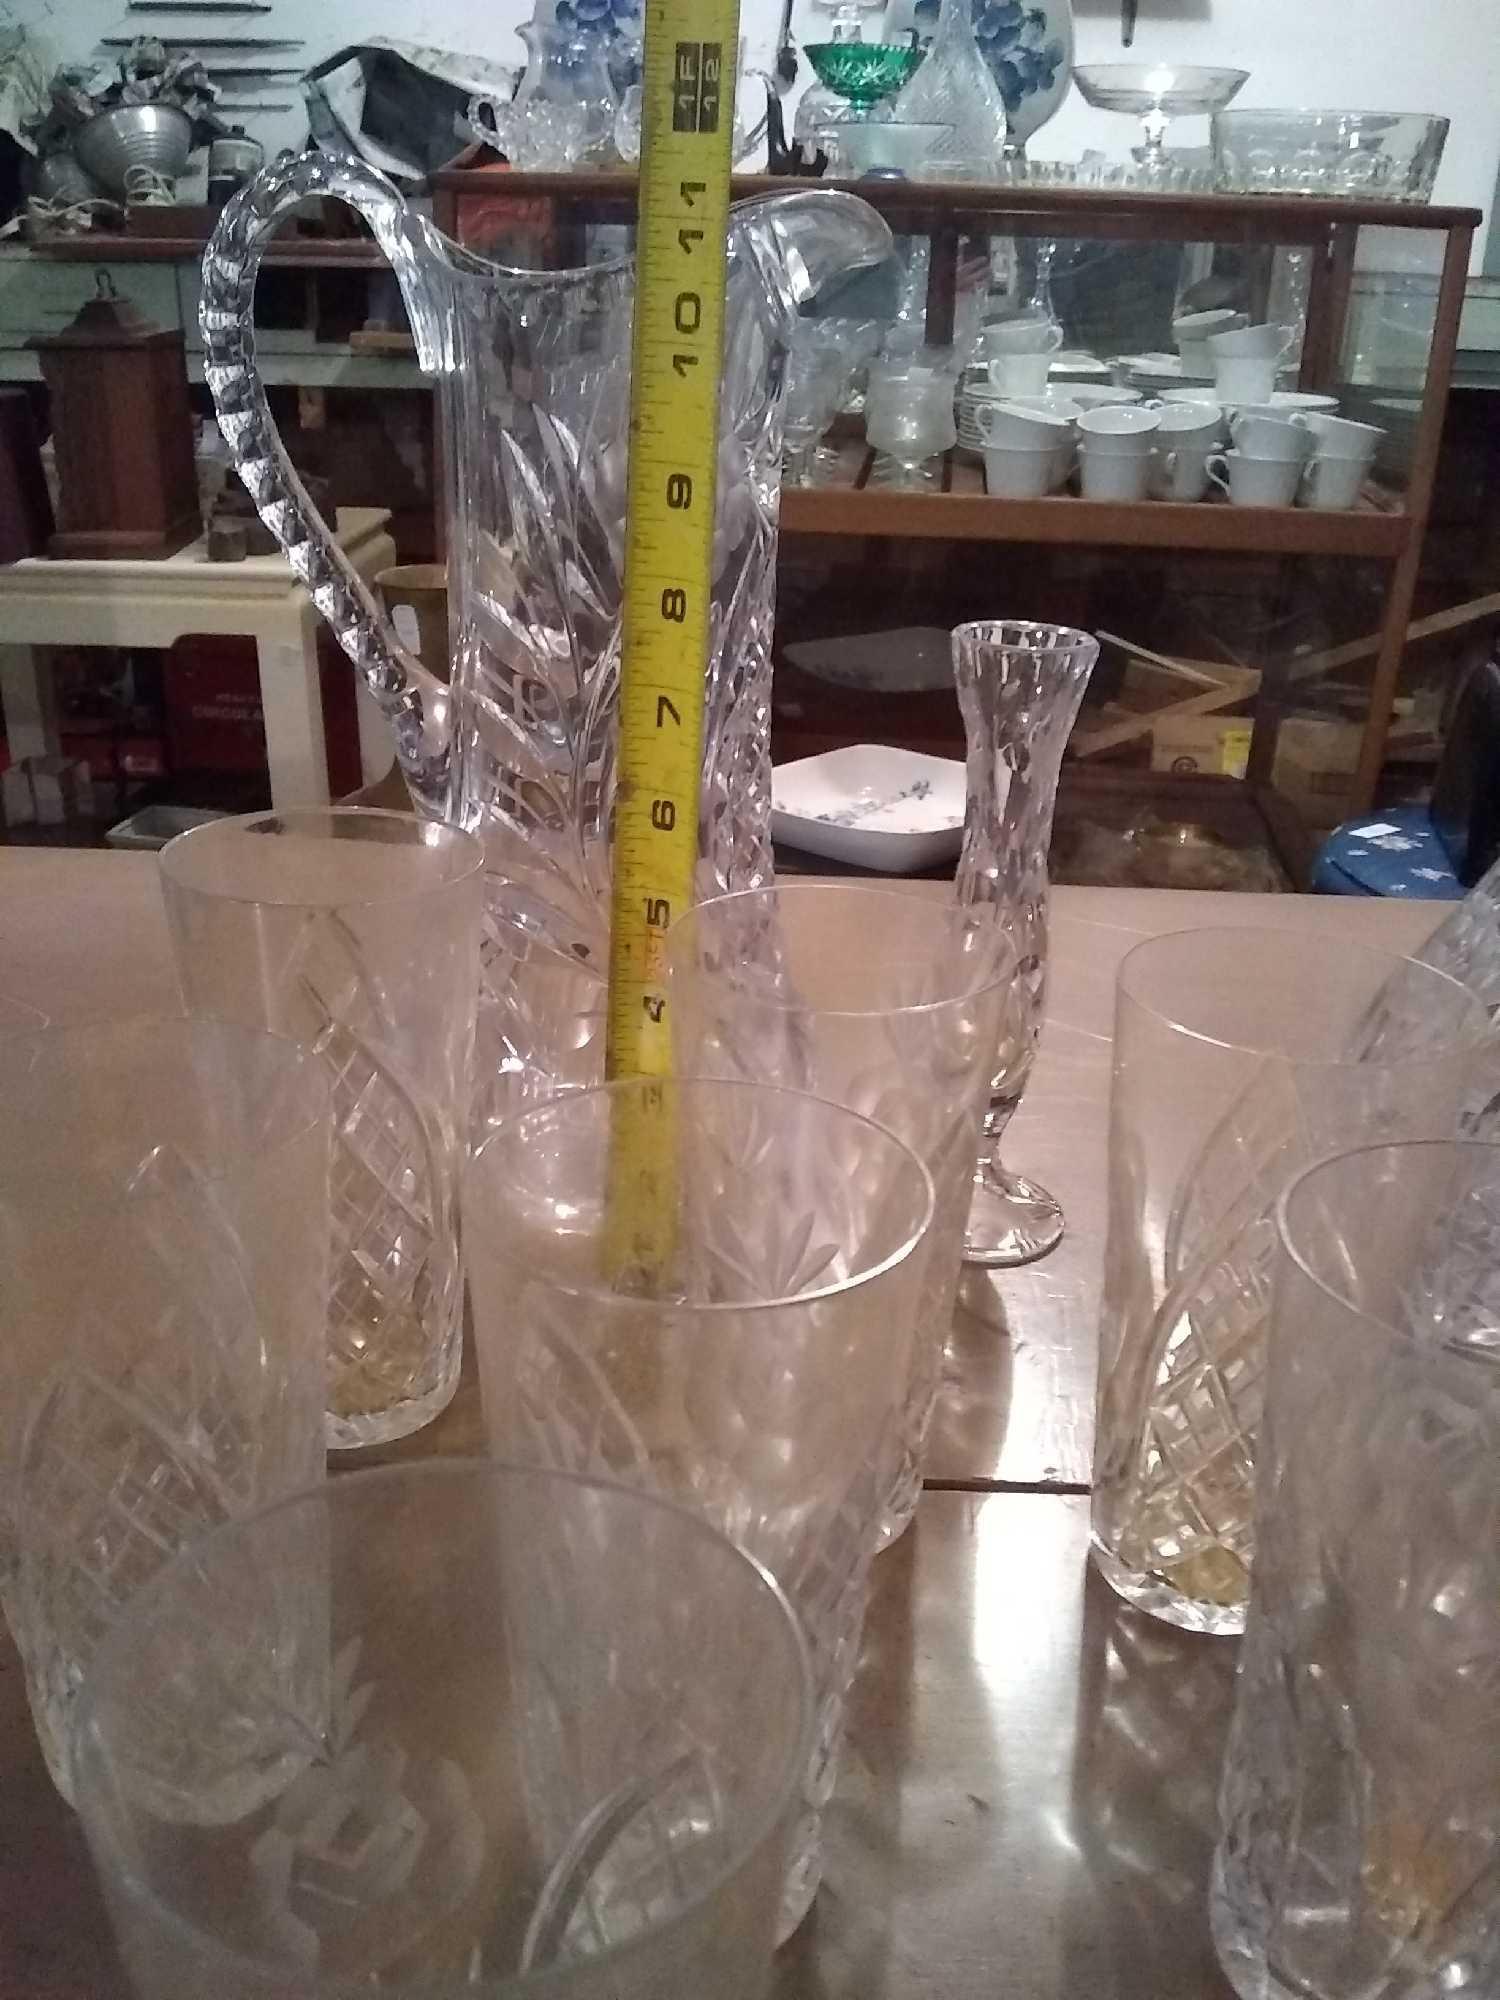 3 cut glass items: Pitcher, Vase, and Decanter and 10 matching glasses